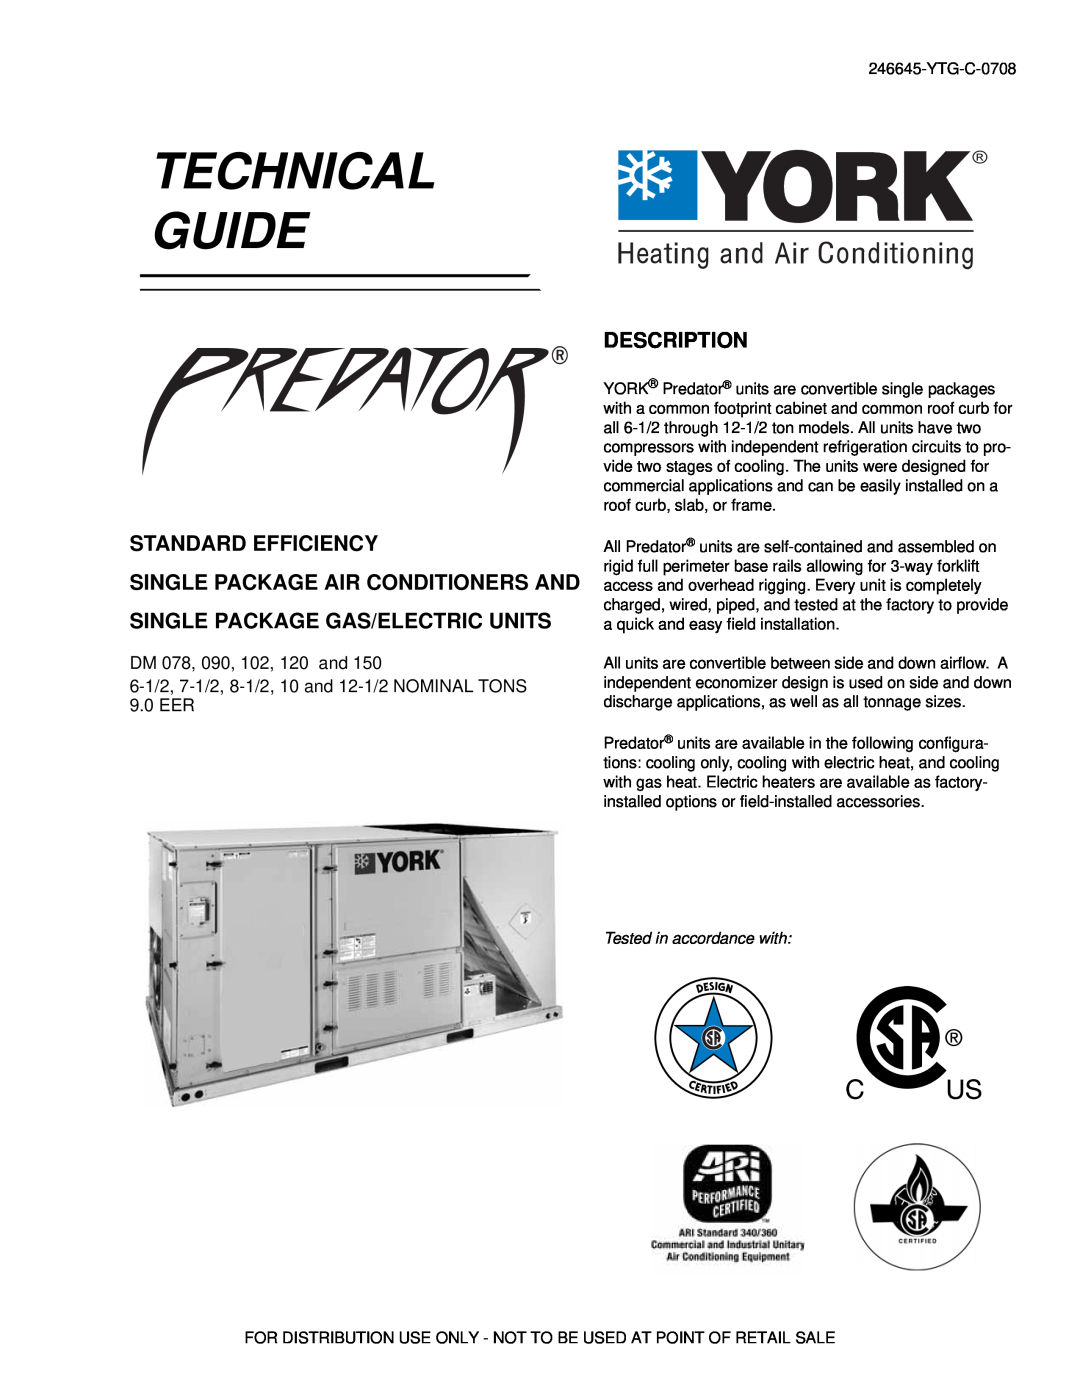 York DM 078 manual Standard Efficiency, Single Package Air Conditioners And, Single Package Gas/Electric Units, Technical 